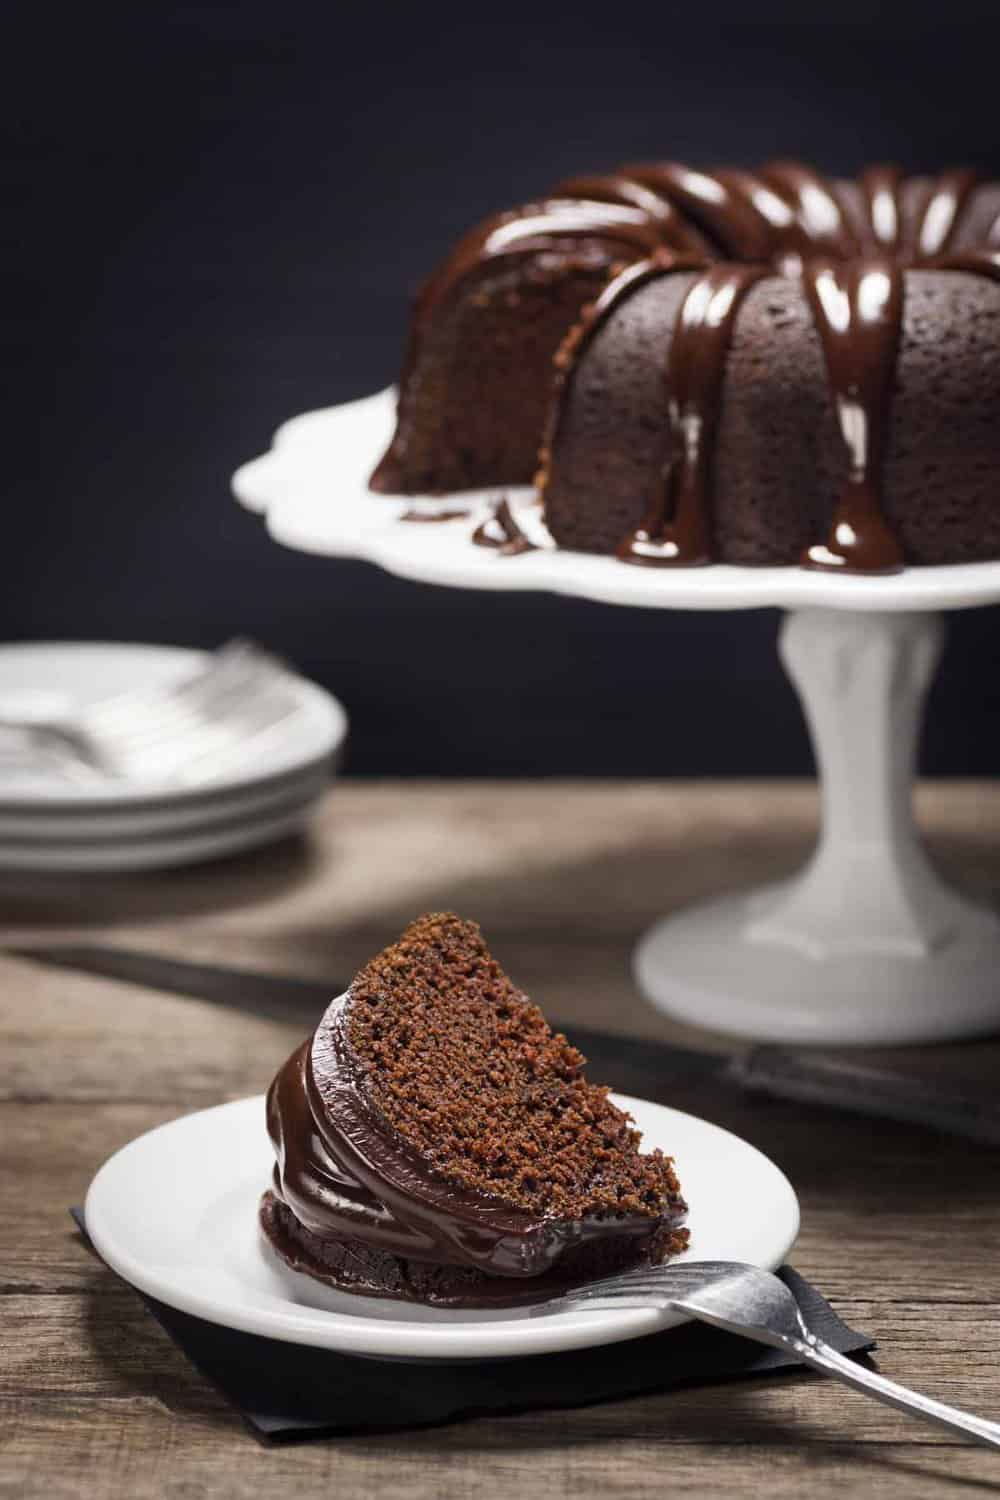 slice of chocolate cake on plate with whole cake in background